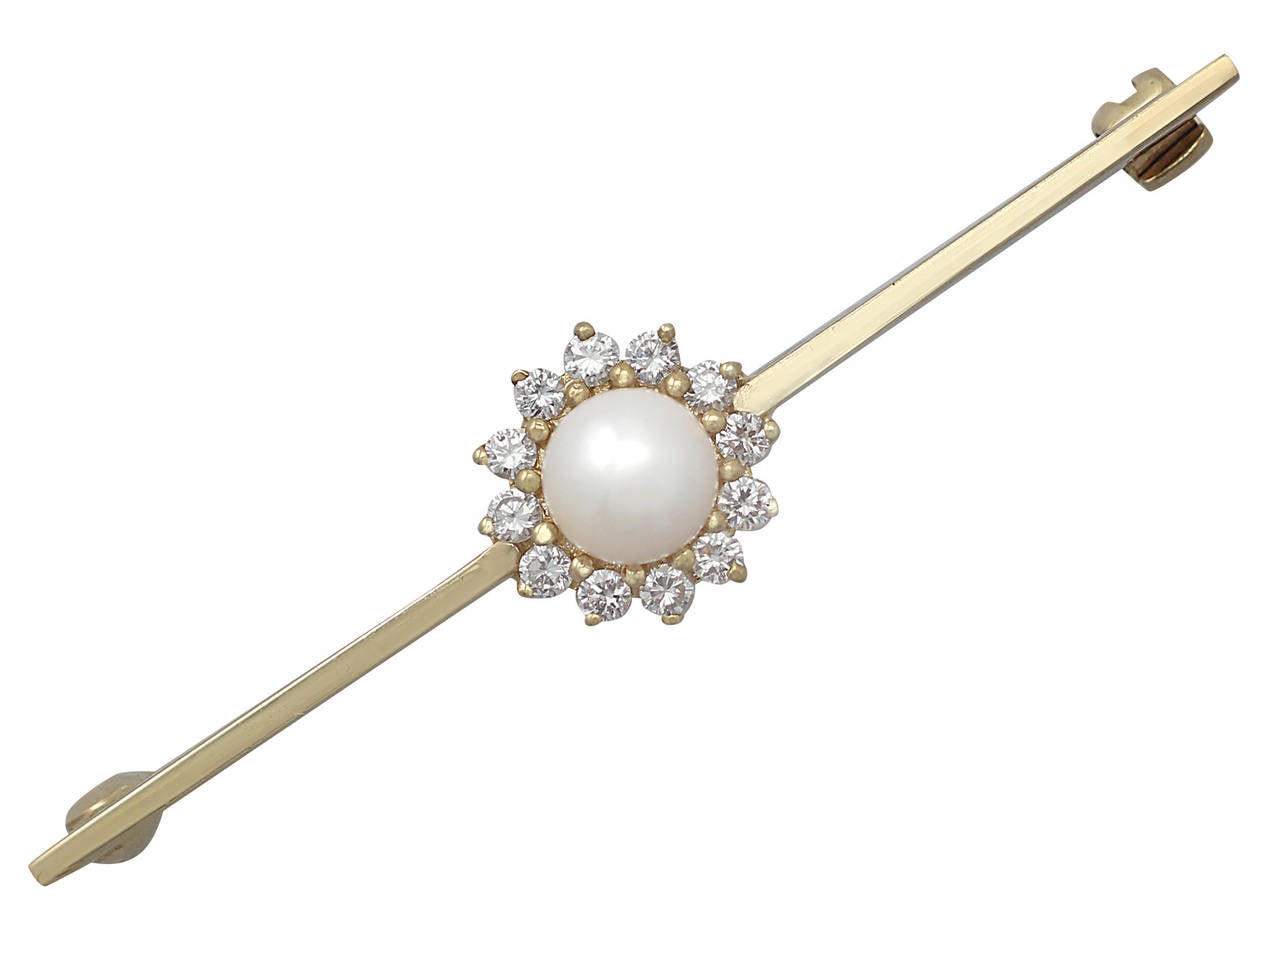 A fine pearl and 0.48 carat diamond, 18 karat yellow gold cluster bar brooch; part of our vintage jewelry and estate jewelry collections

This fine pearl brooch has been crafted in 18k yellow gold.

The bar brooch features a claw / prong set 6mm